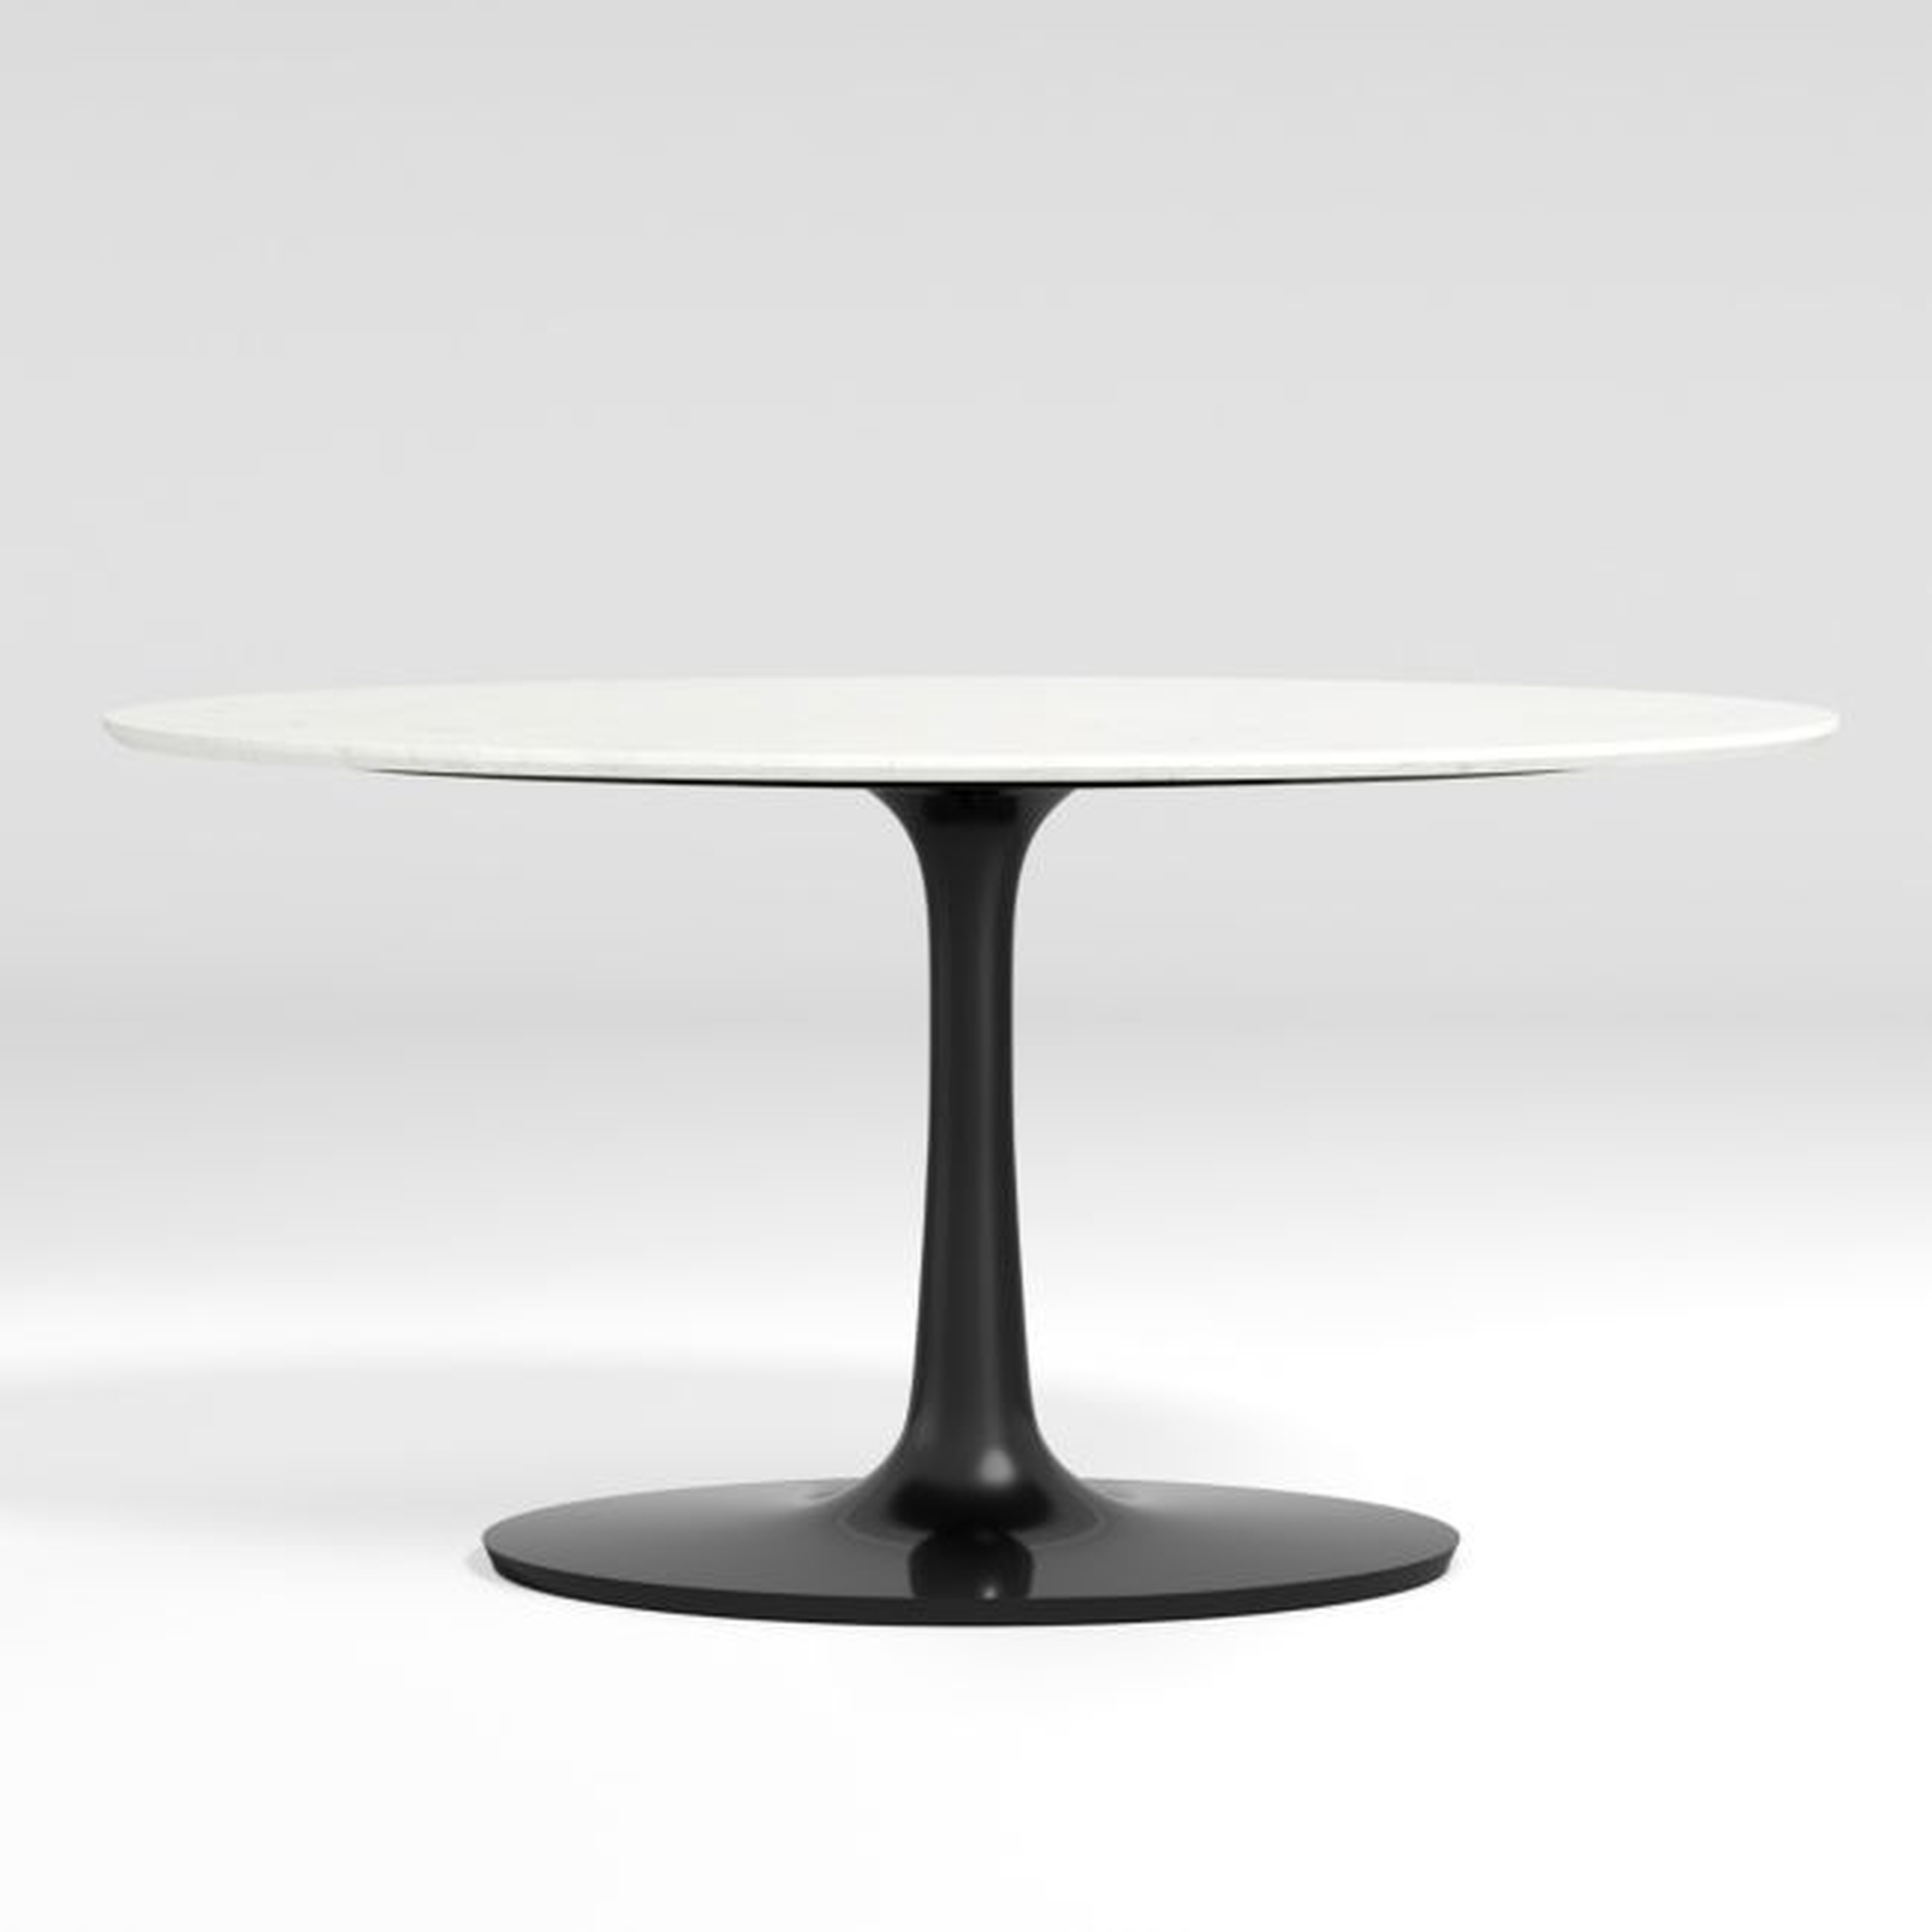 Nero Oval White Marble Top 36" Dining Table with Matte Black Base - Crate and Barrel